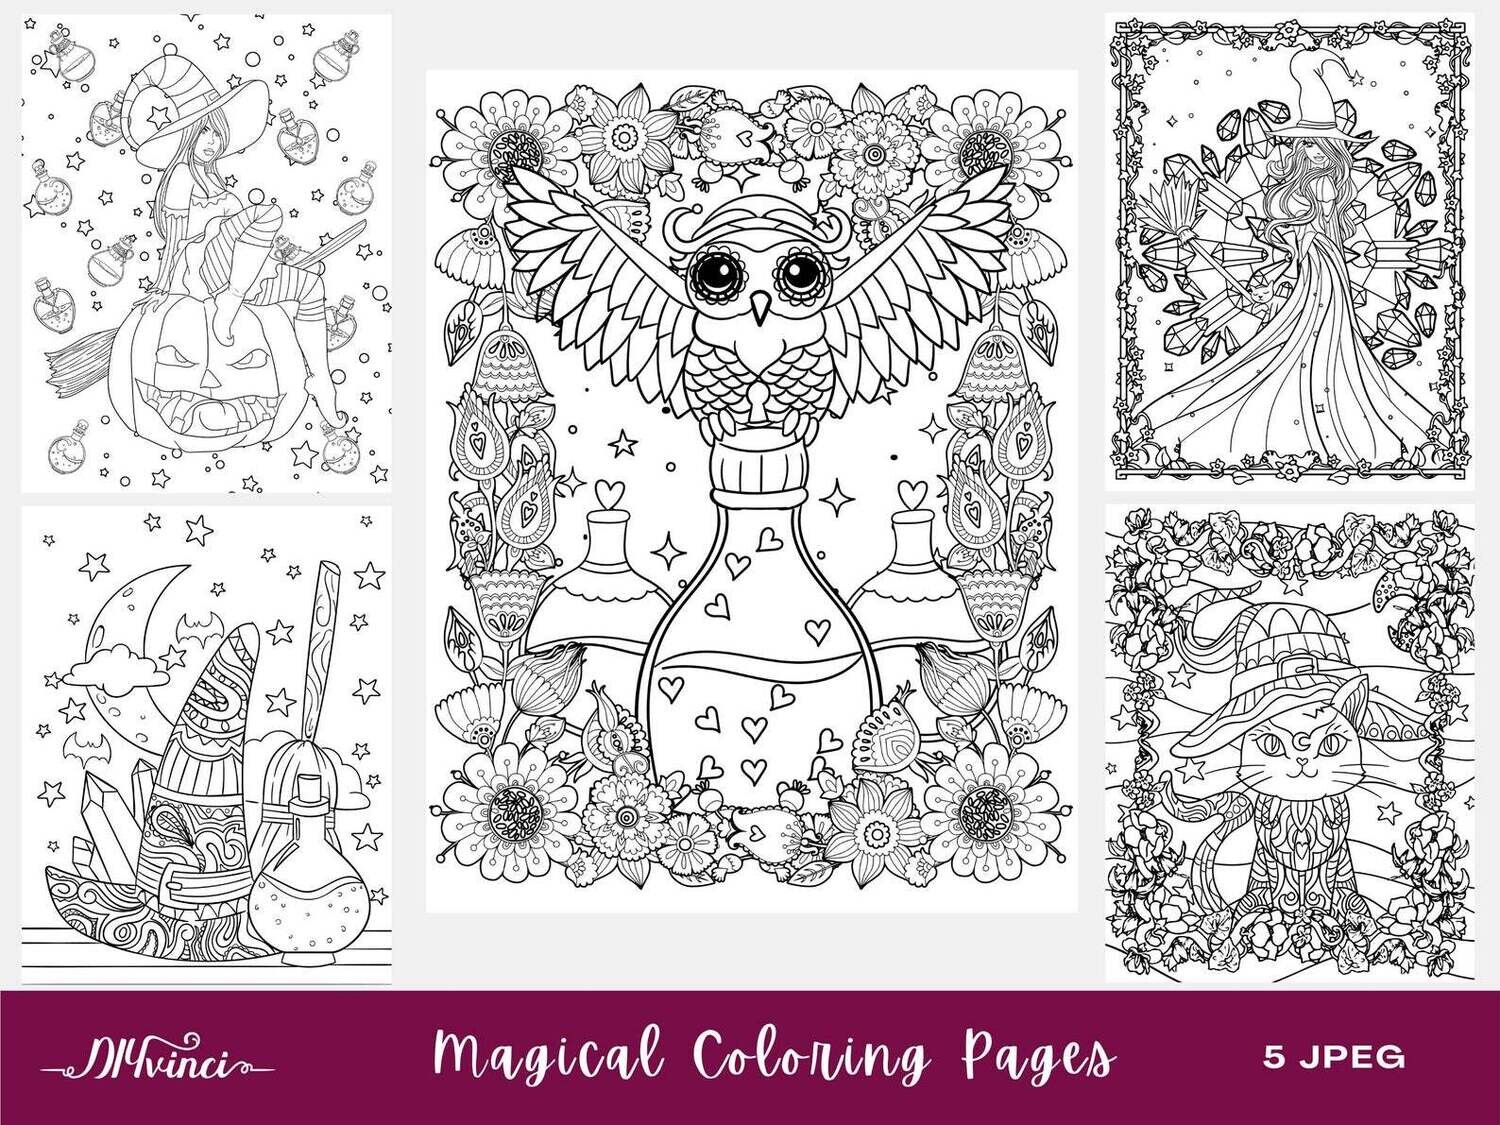 Printable Magical/Witch Coloring Pages   20 JPEG   Personal & Commercial Use